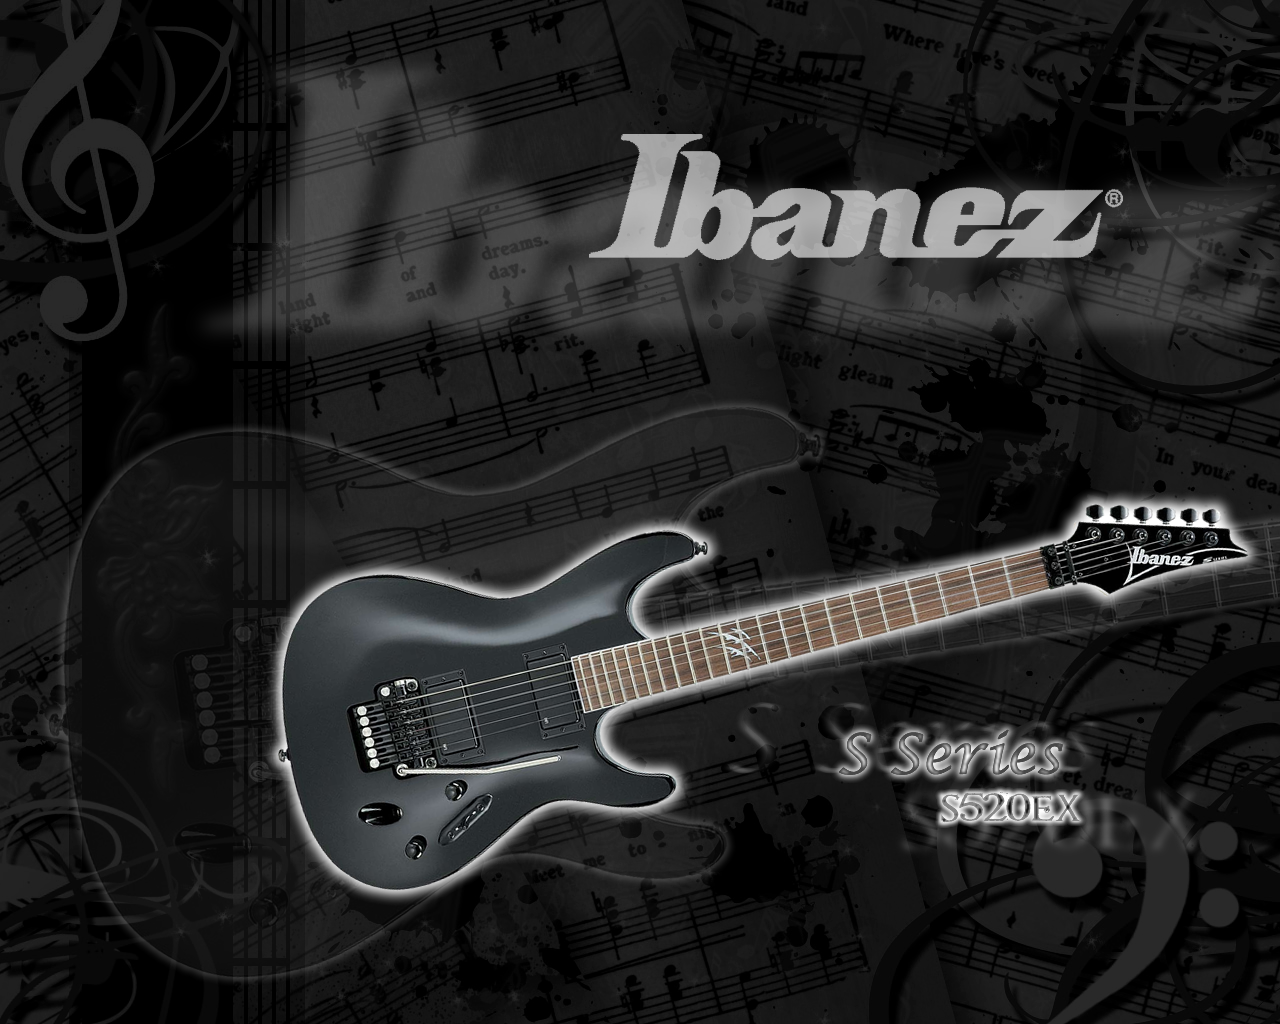 Ibanez Wall Paper Wallpapers